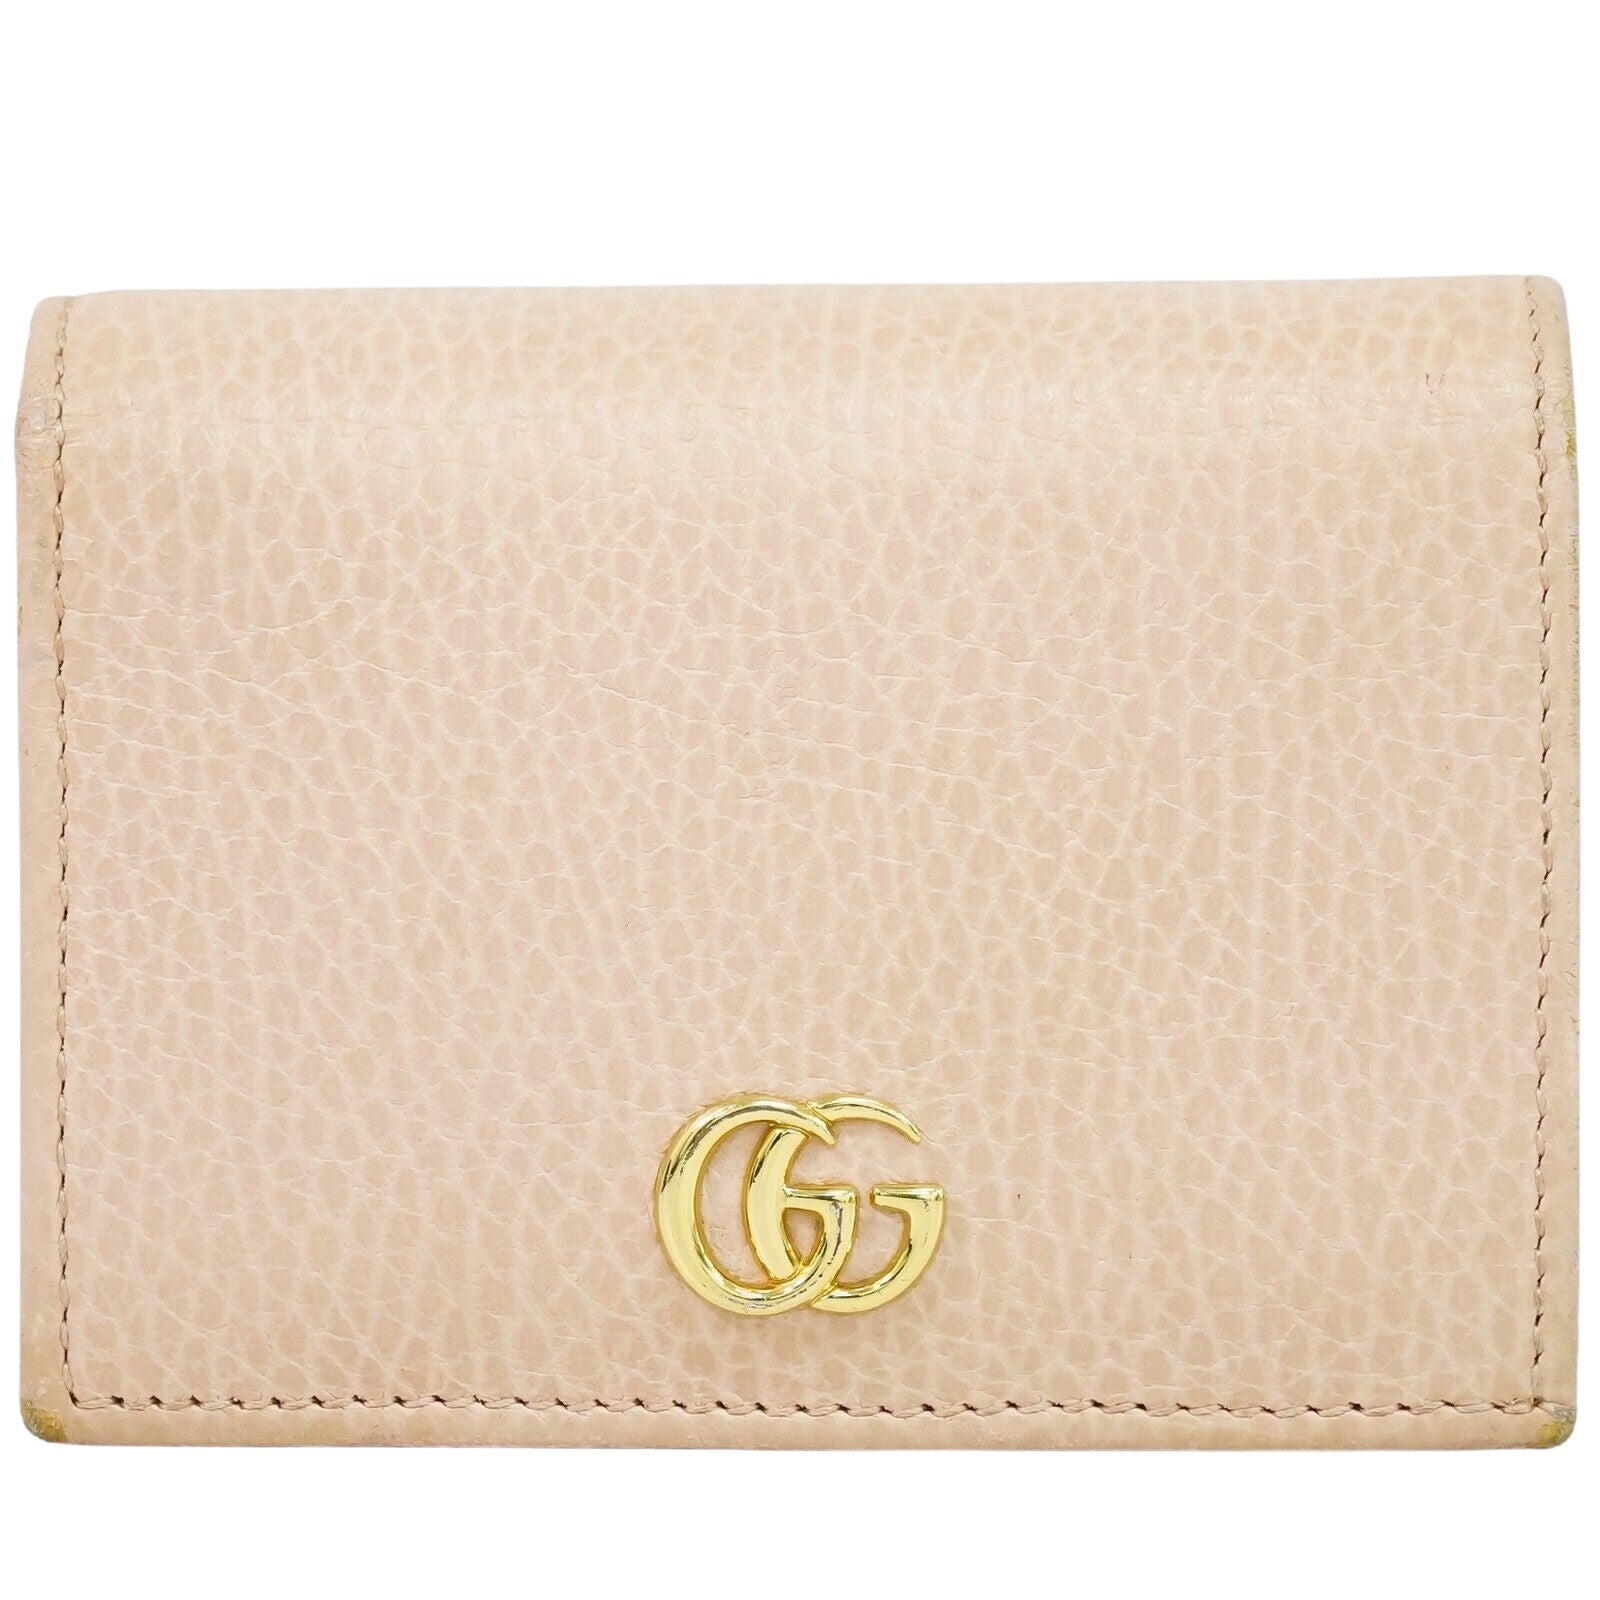 Gucci Gg Marmont Pink Leather Wallet  ()